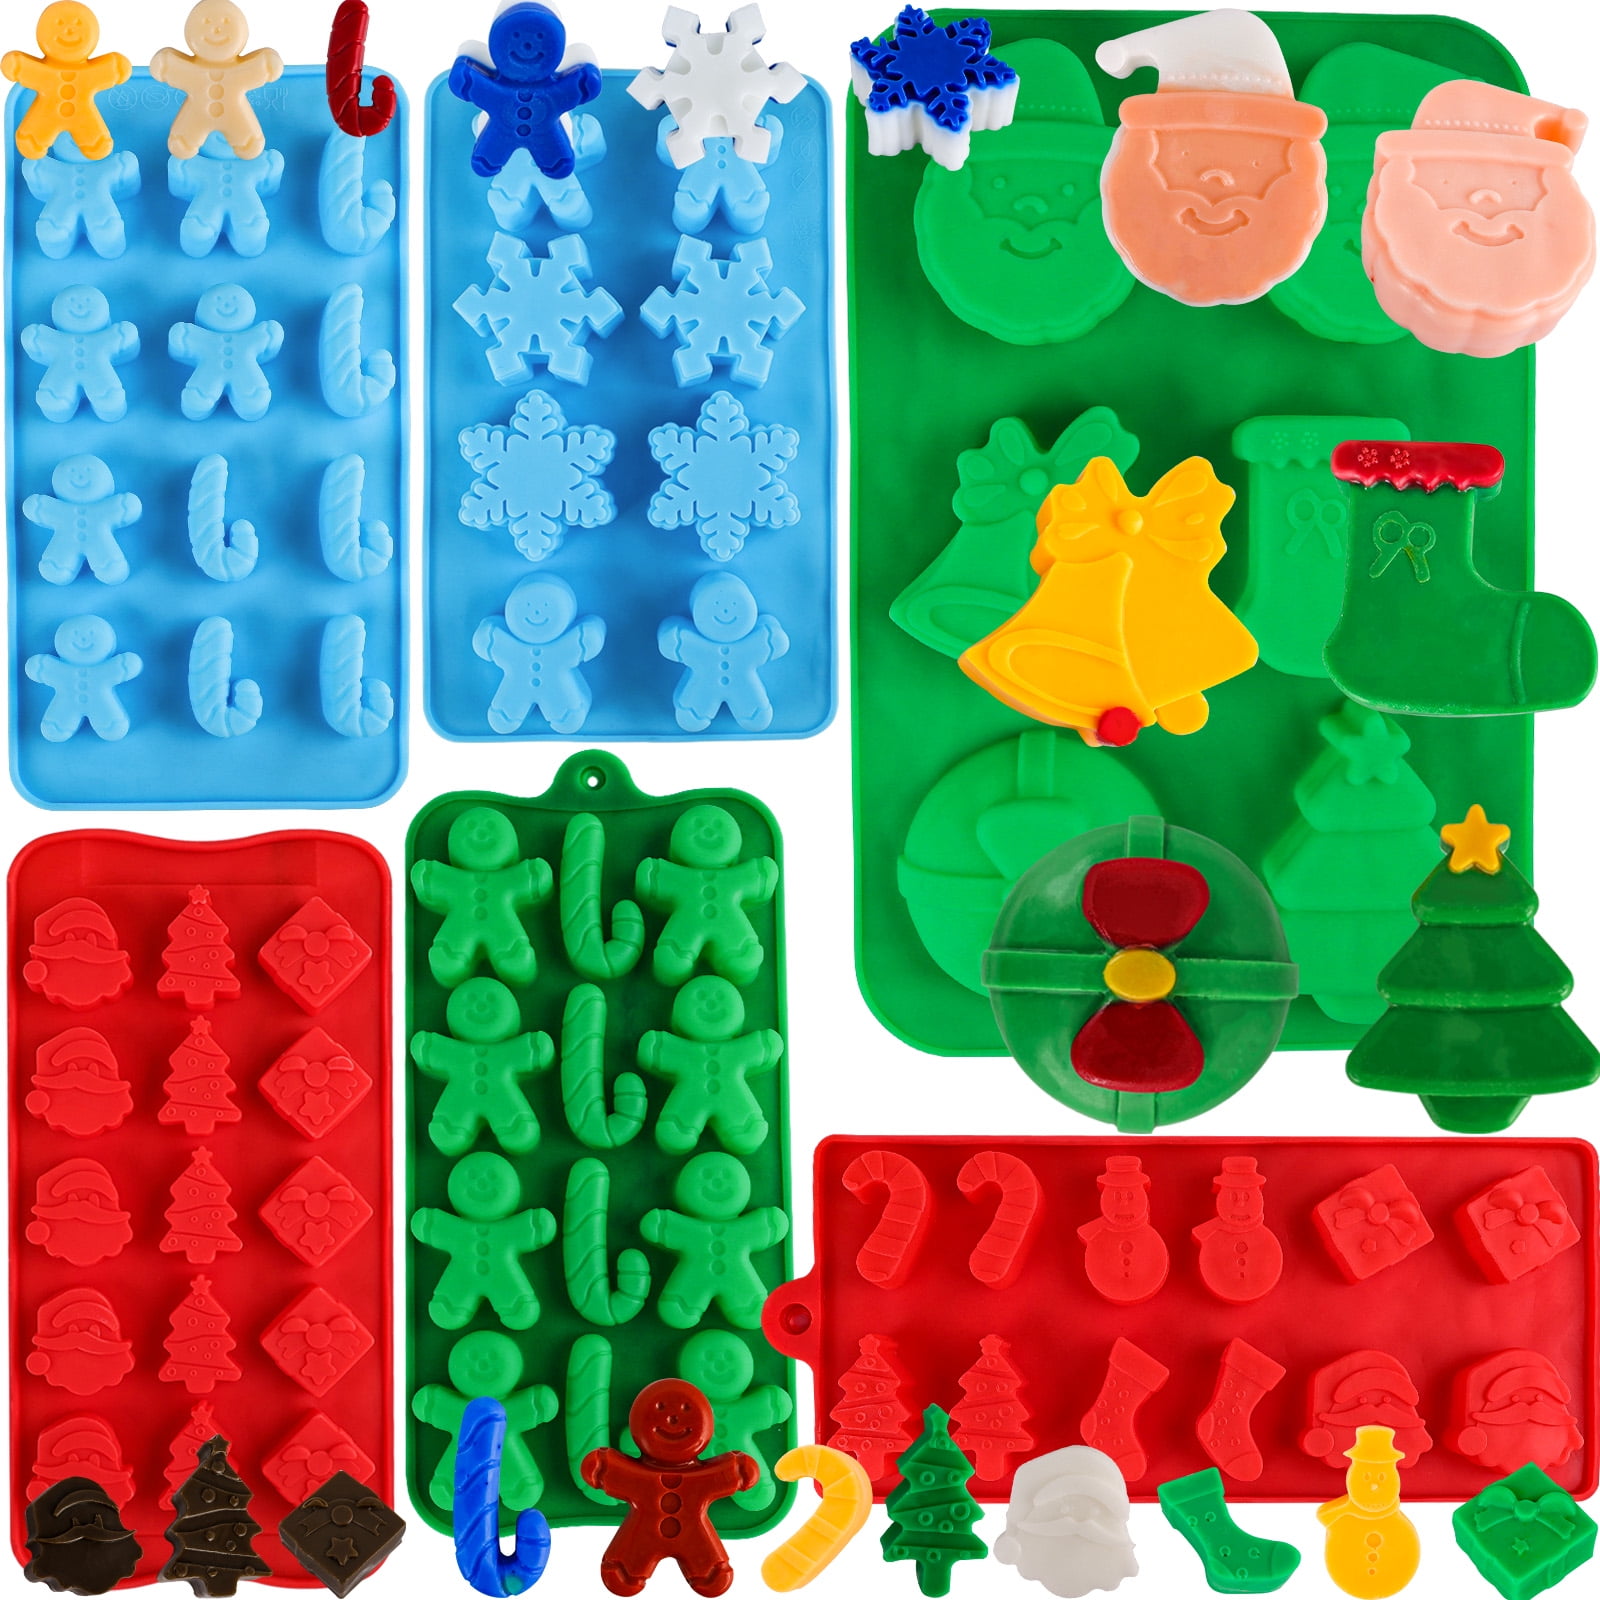 Small Robotic Silicone Resin Molds - Making Candy and Chocolate